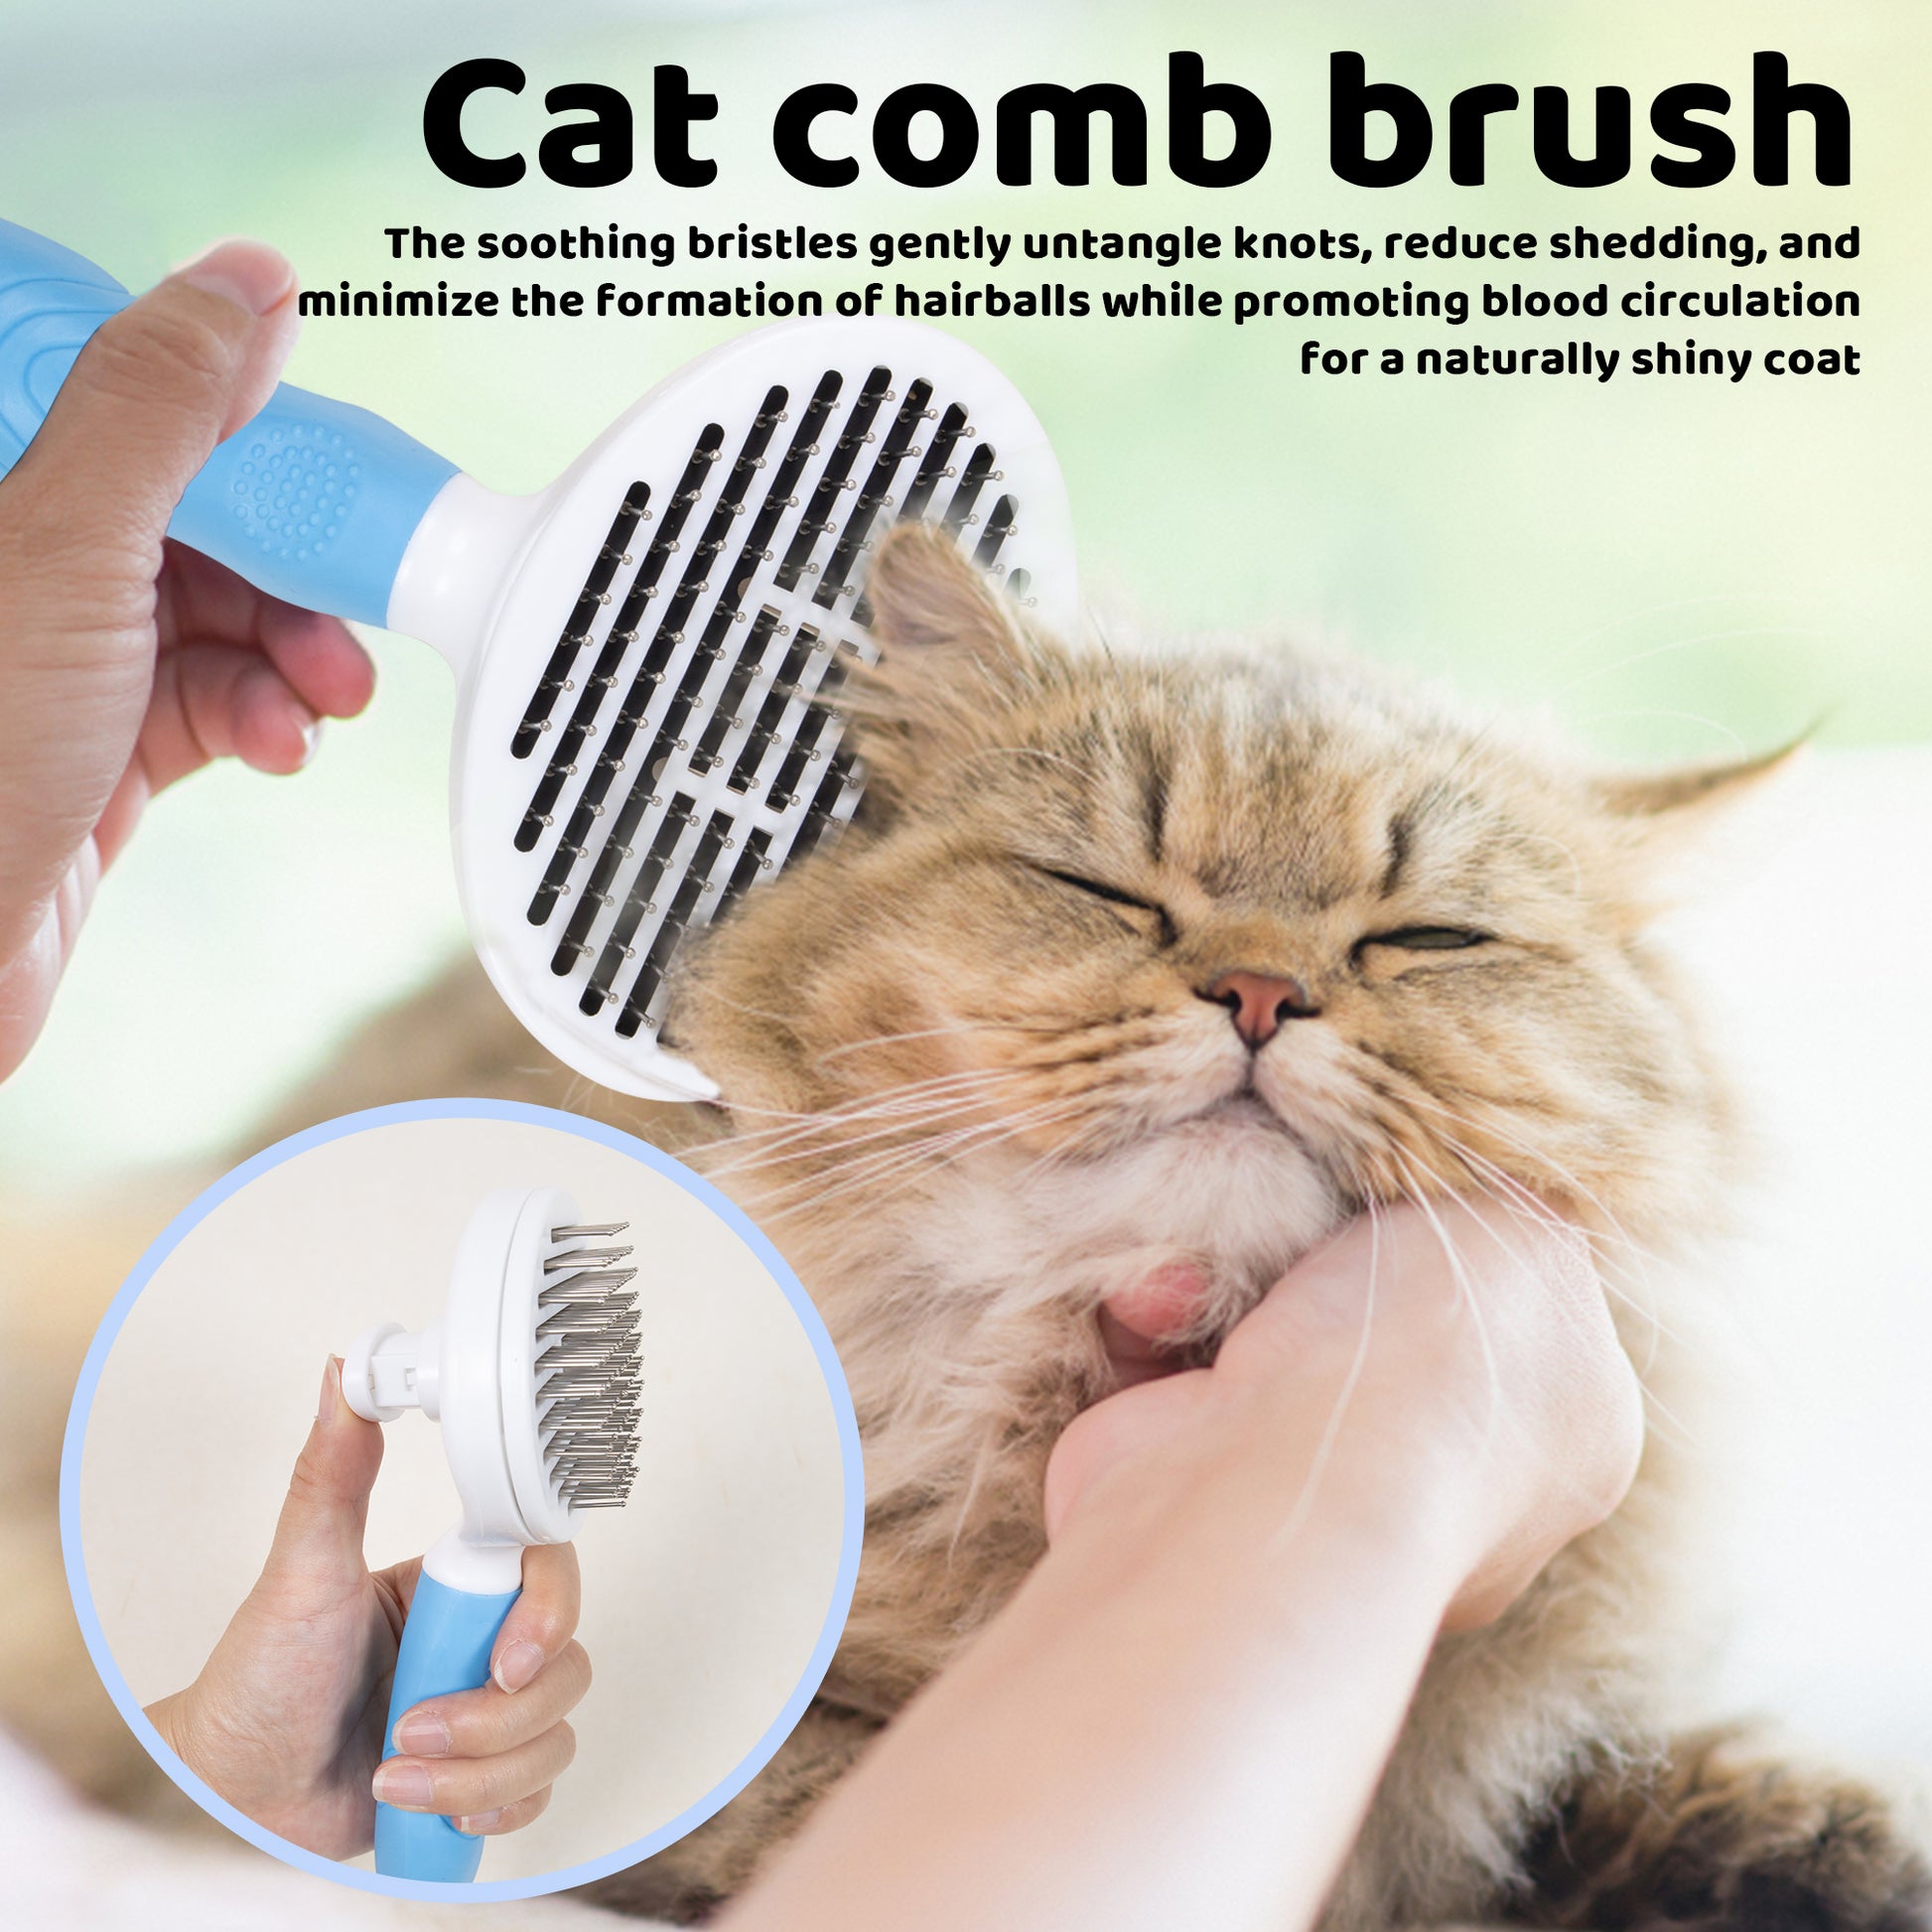 Smart Self-Cleaning Cat Brush: Innovative grooming tool with soft bristles for a purr-fectly groomed cat. Say goodbye to shedding hassles!